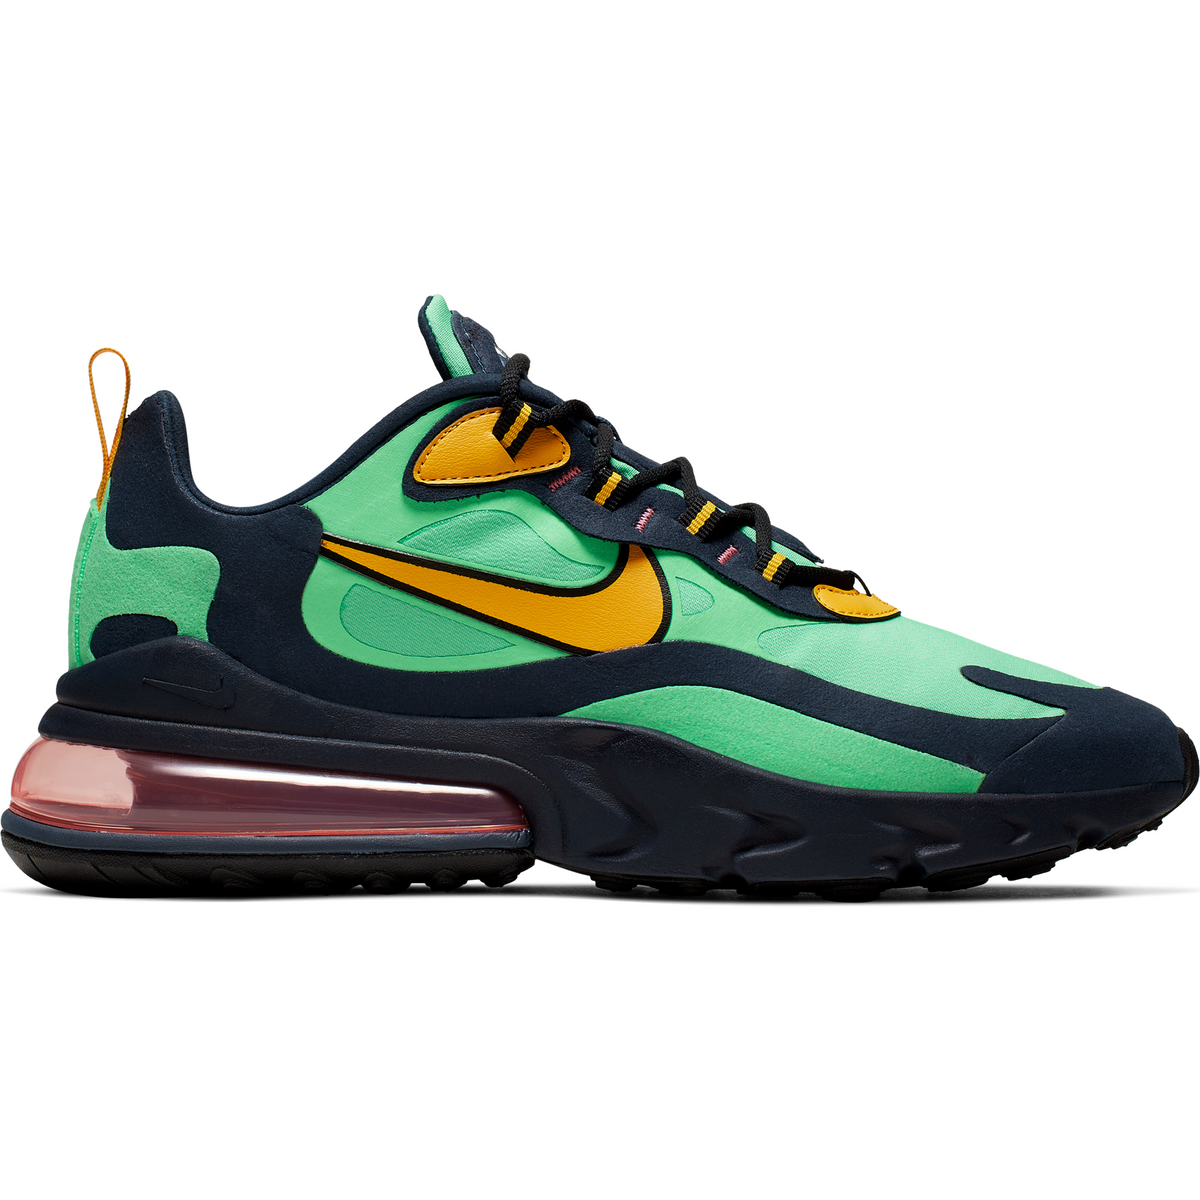 extreem maïs Zee Nike Men's Air Max 270 React "Pop Art" Shoes - Green / Black / Yellow —  Just For Sports